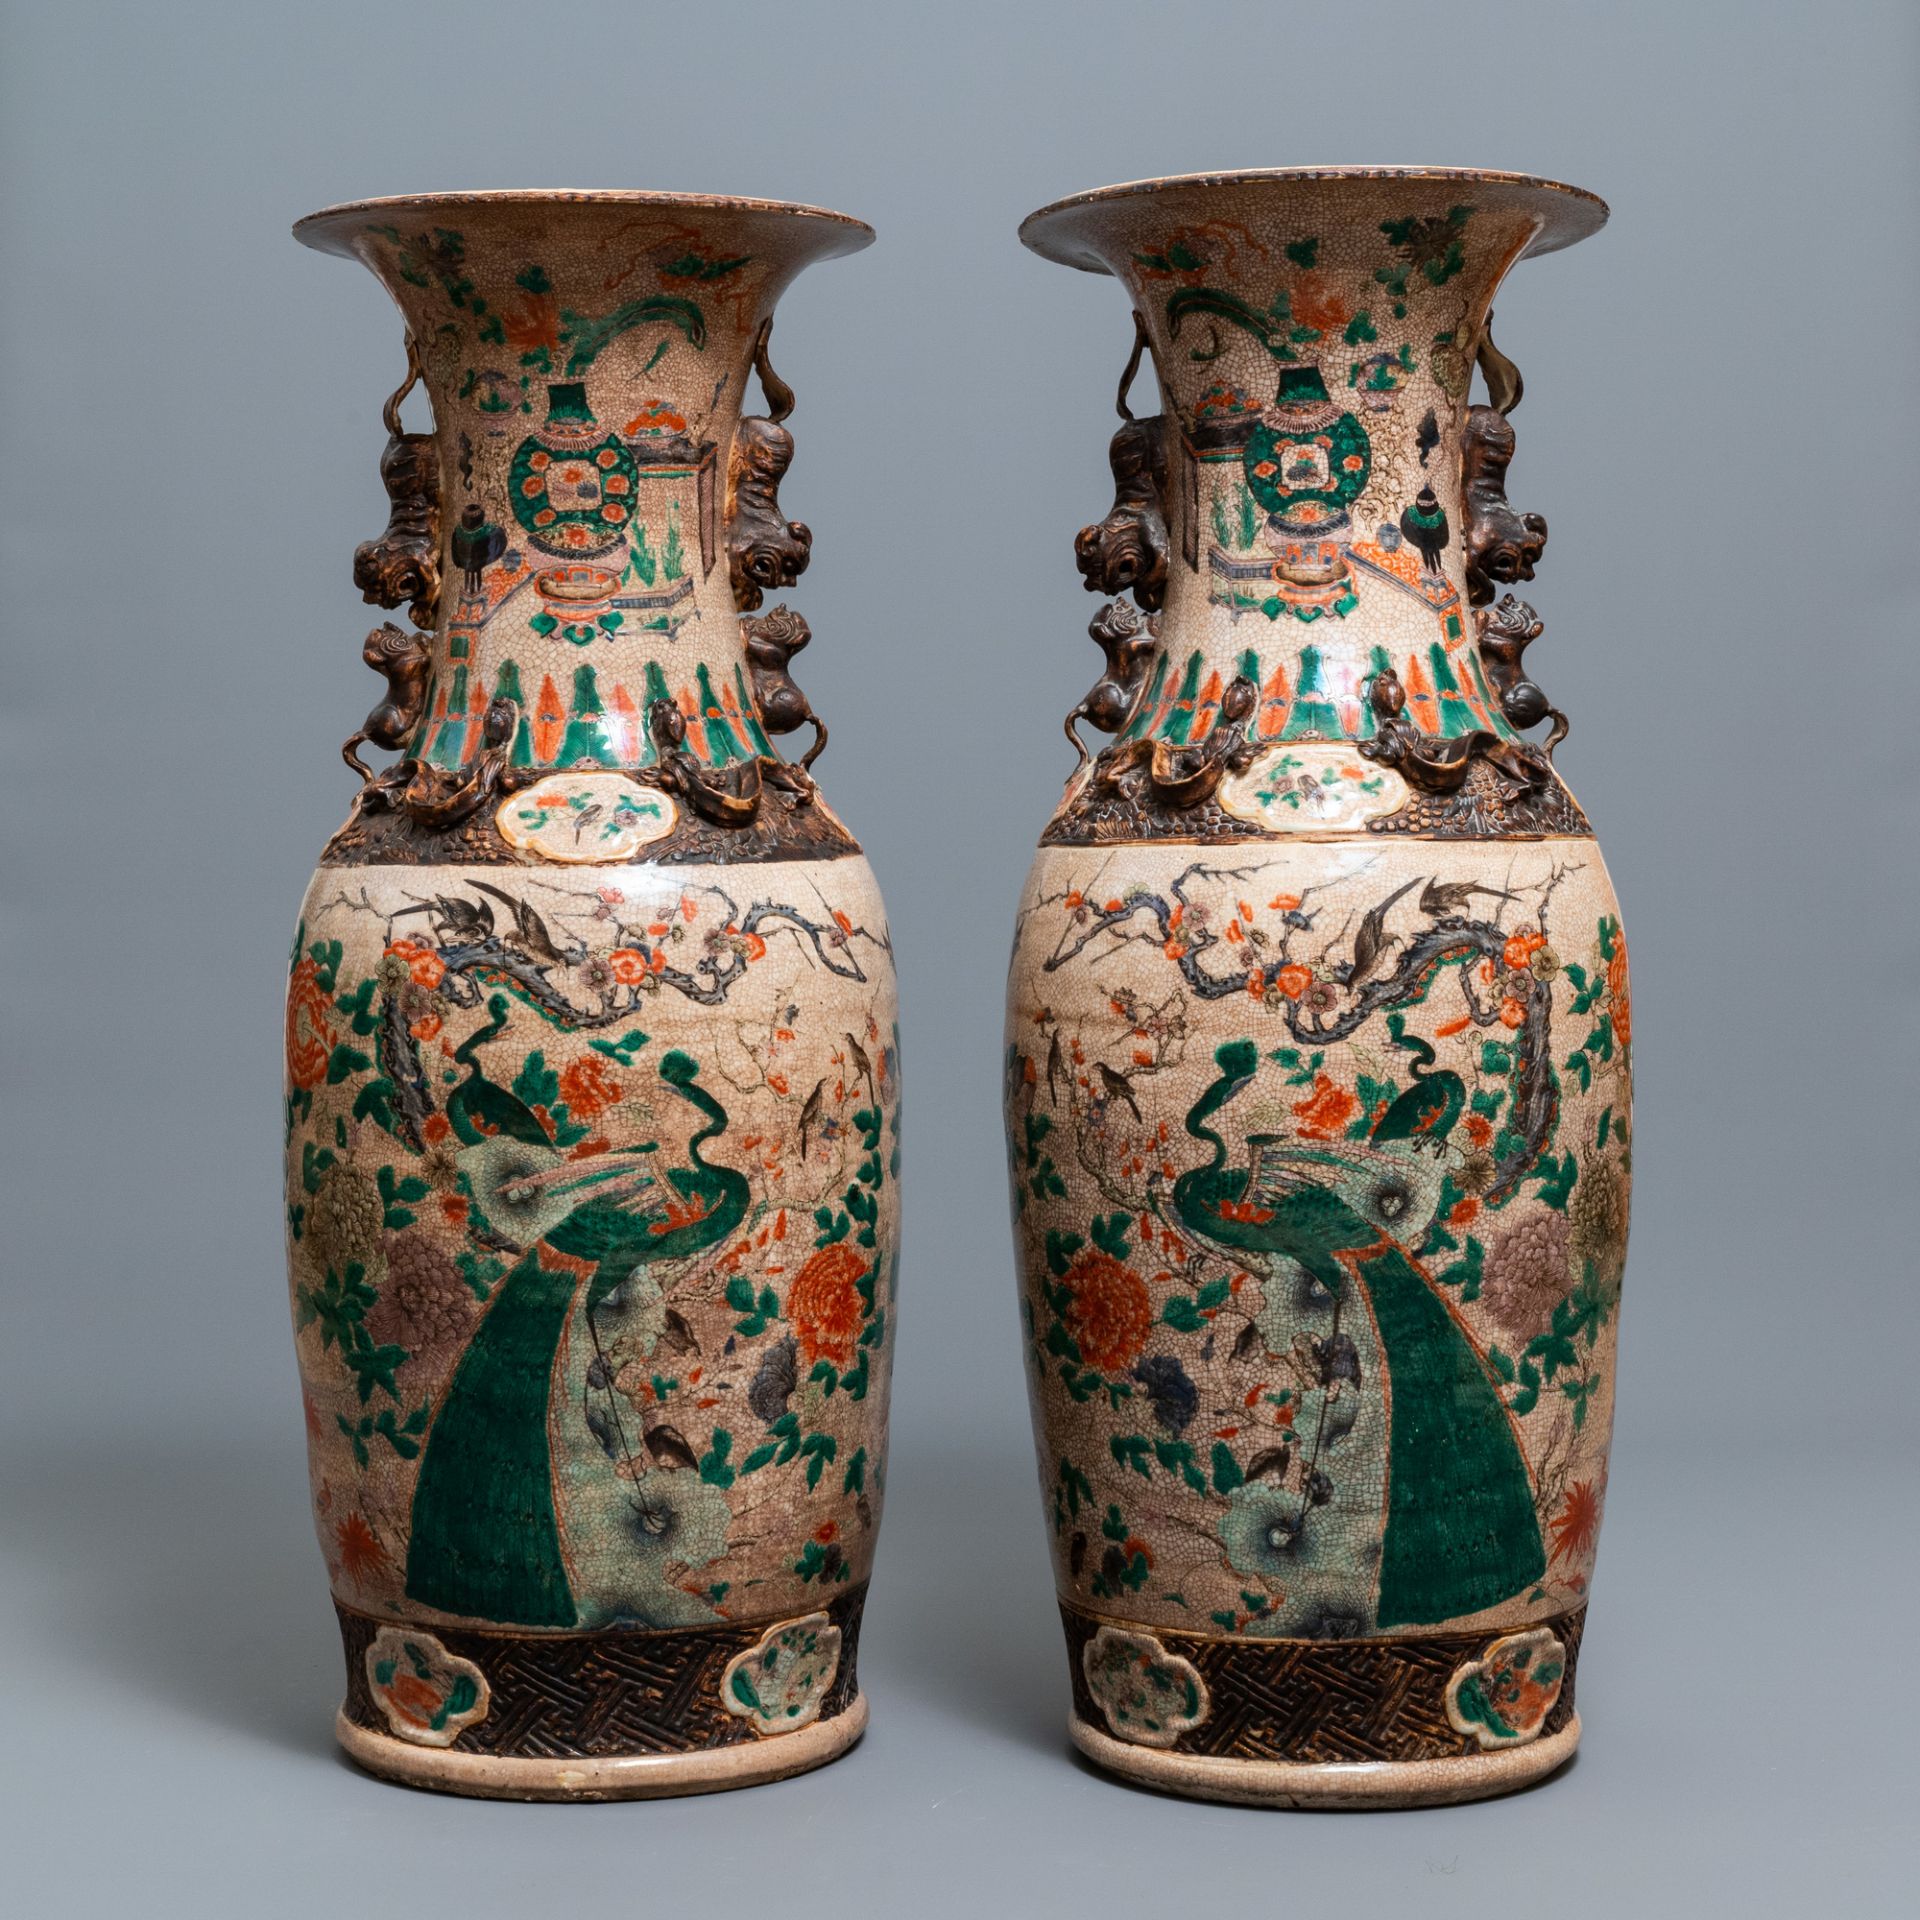 A pair of very large Chinese Nanking crackle-glazed famille verte vases, 19th C. - Image 3 of 6